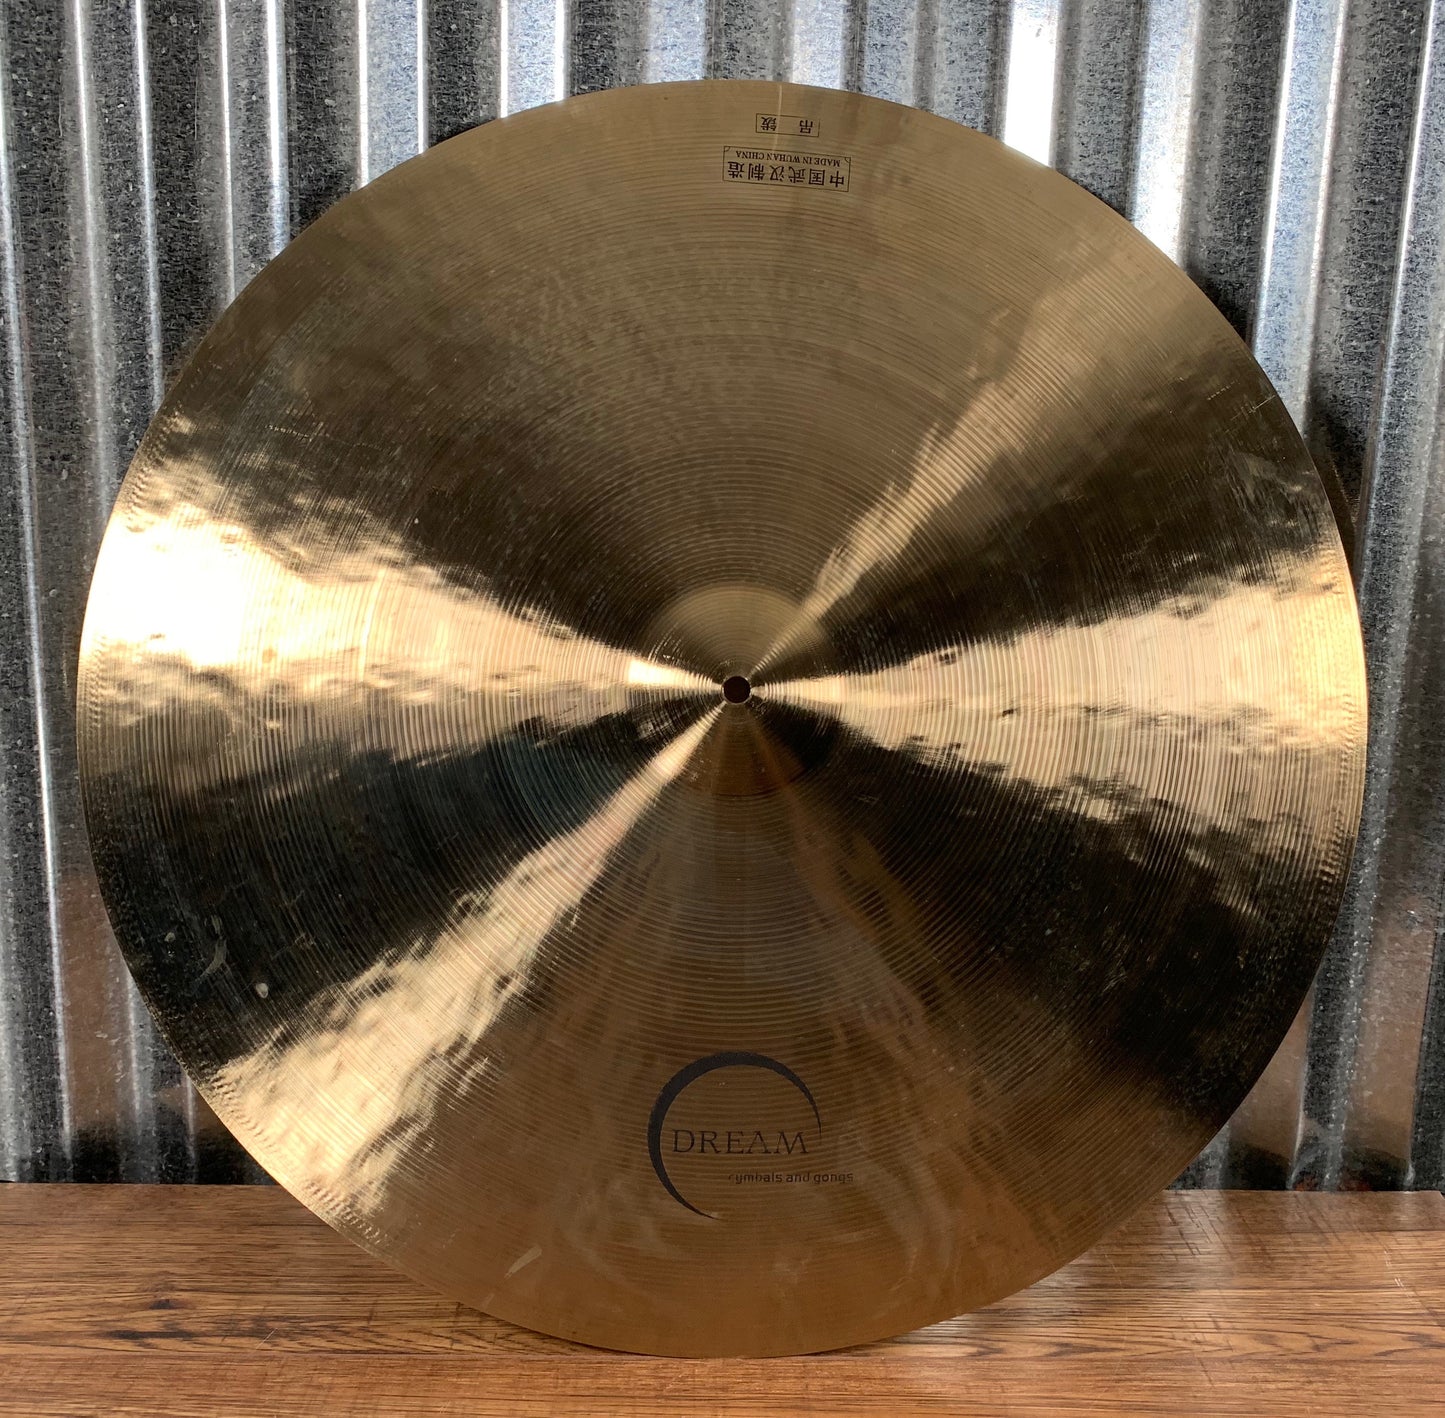 Dream Cymbals C-SBF24 Contact Series Hand Forged & Hammered 24" Small Bell Flat Ride Demo